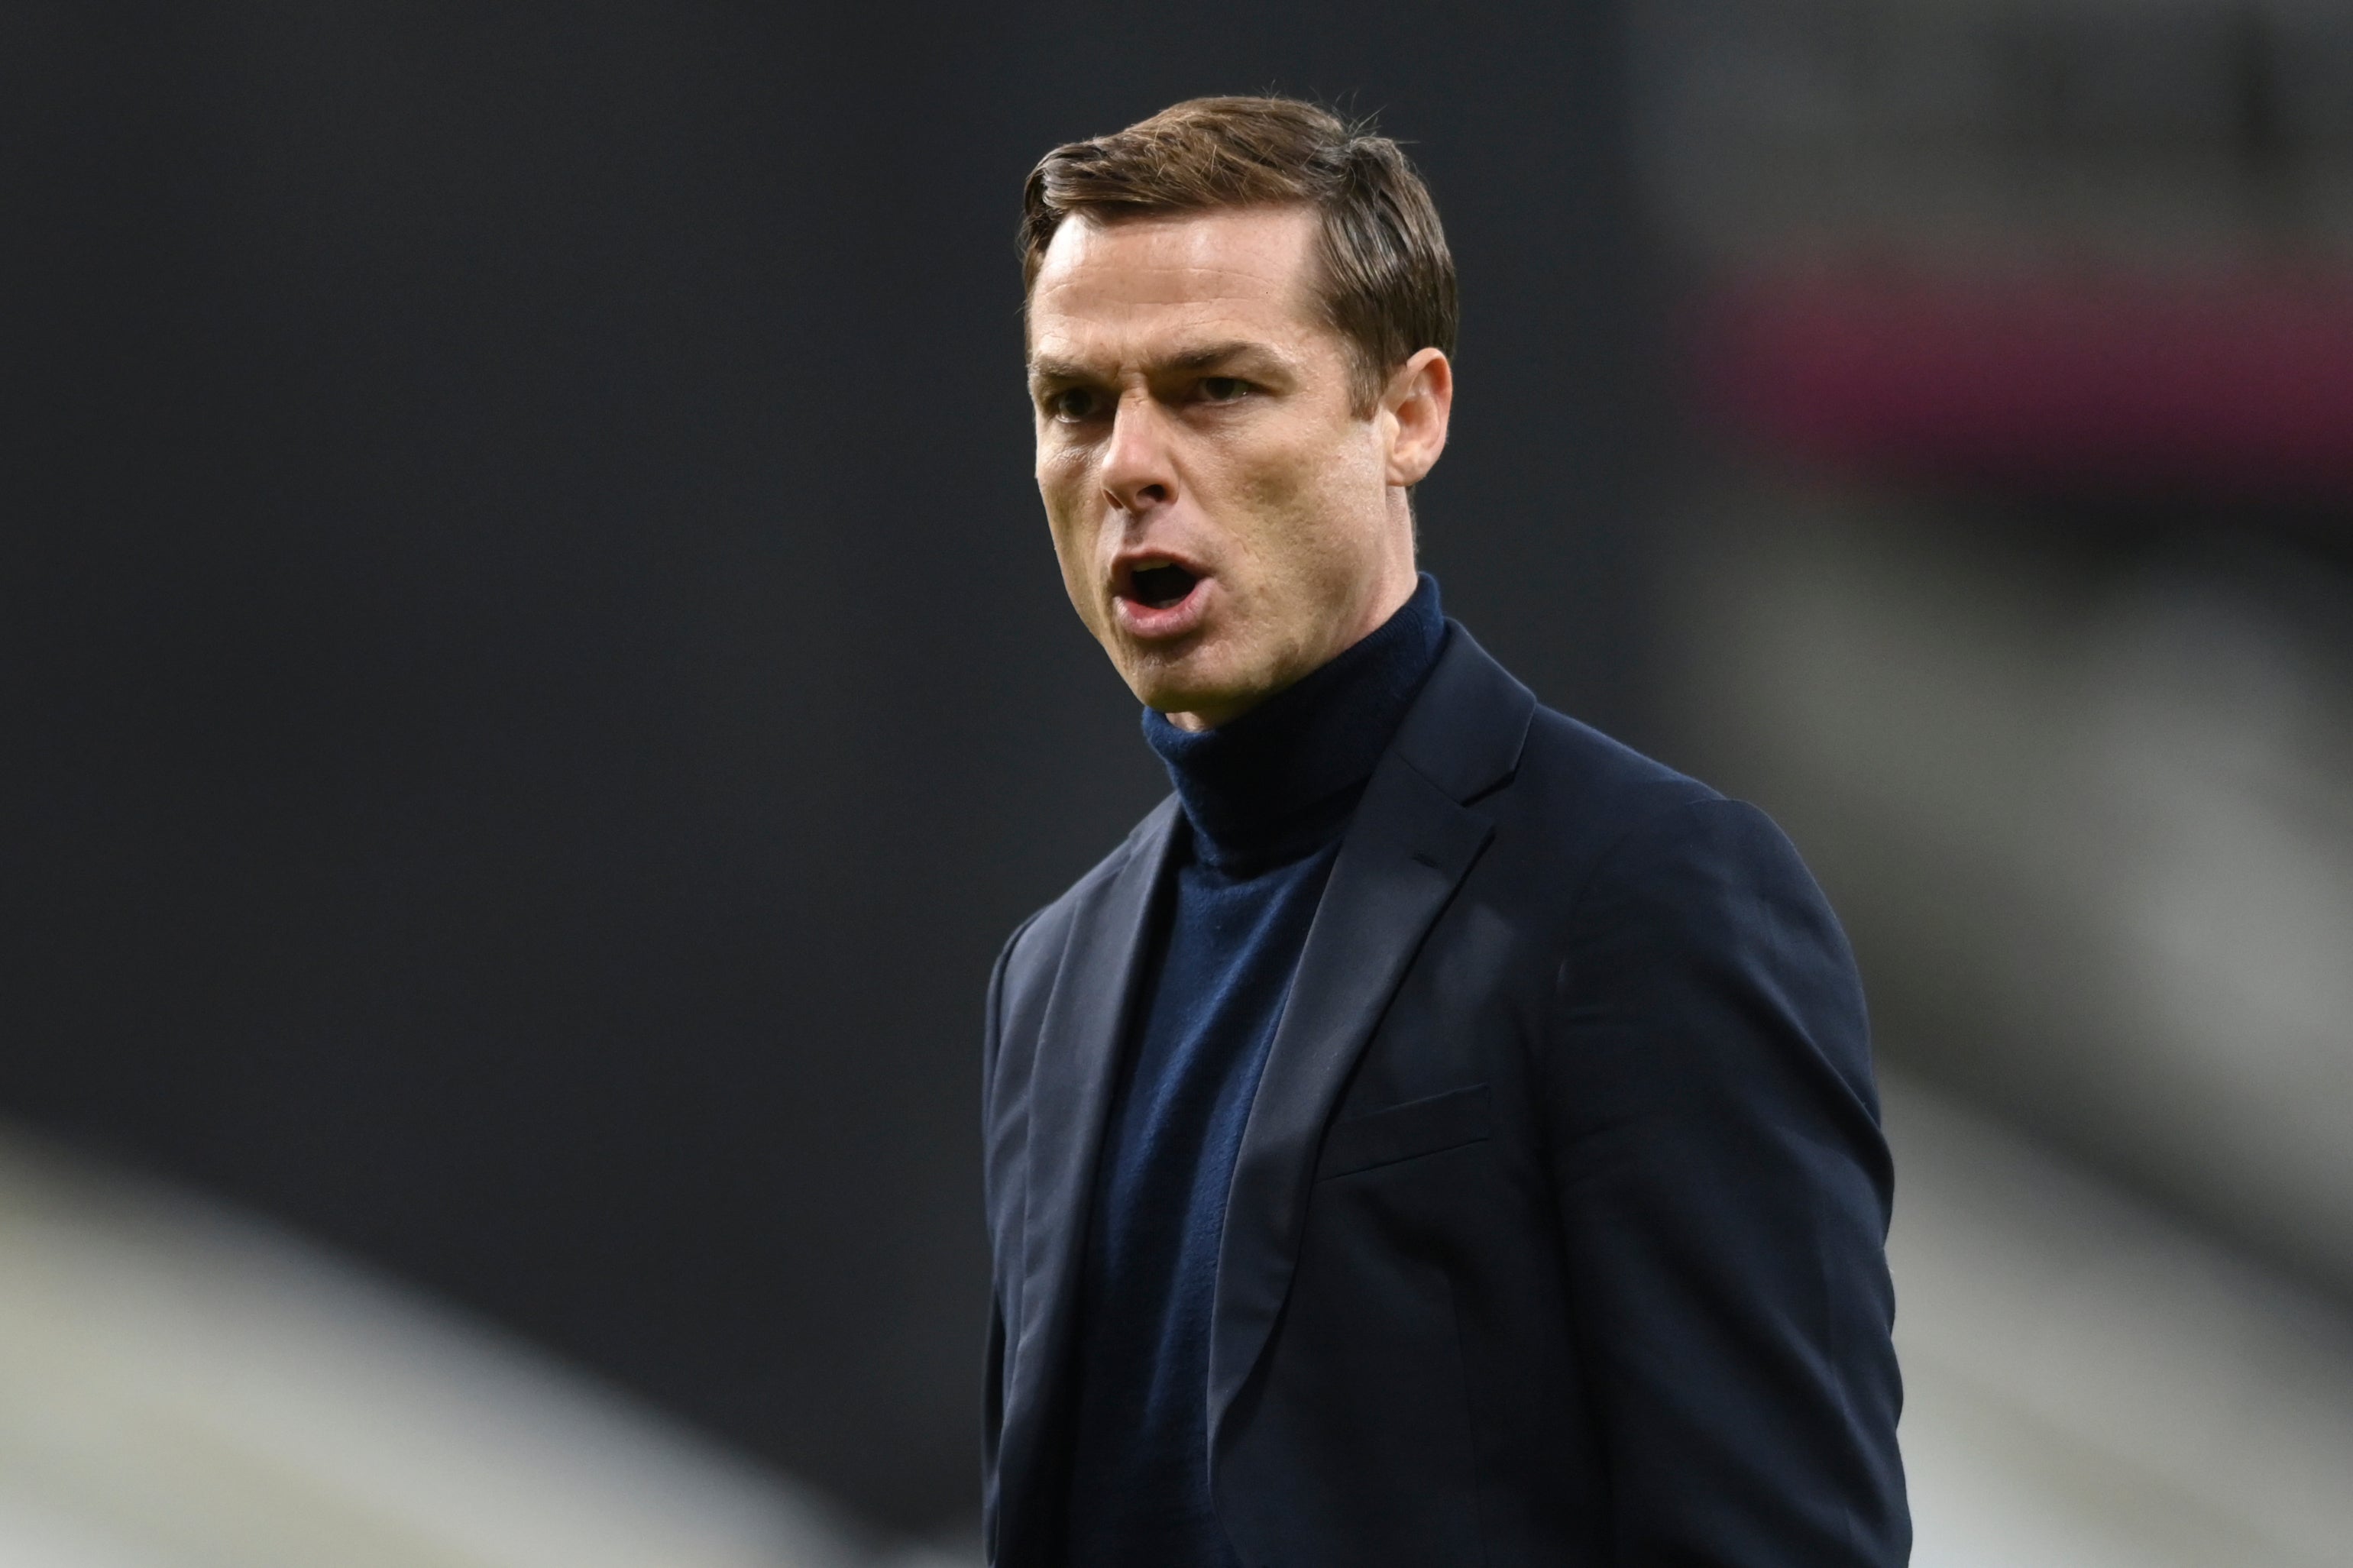 Fulham manager Scott Parker will miss the Boxing Day Premier League clash with Southampton